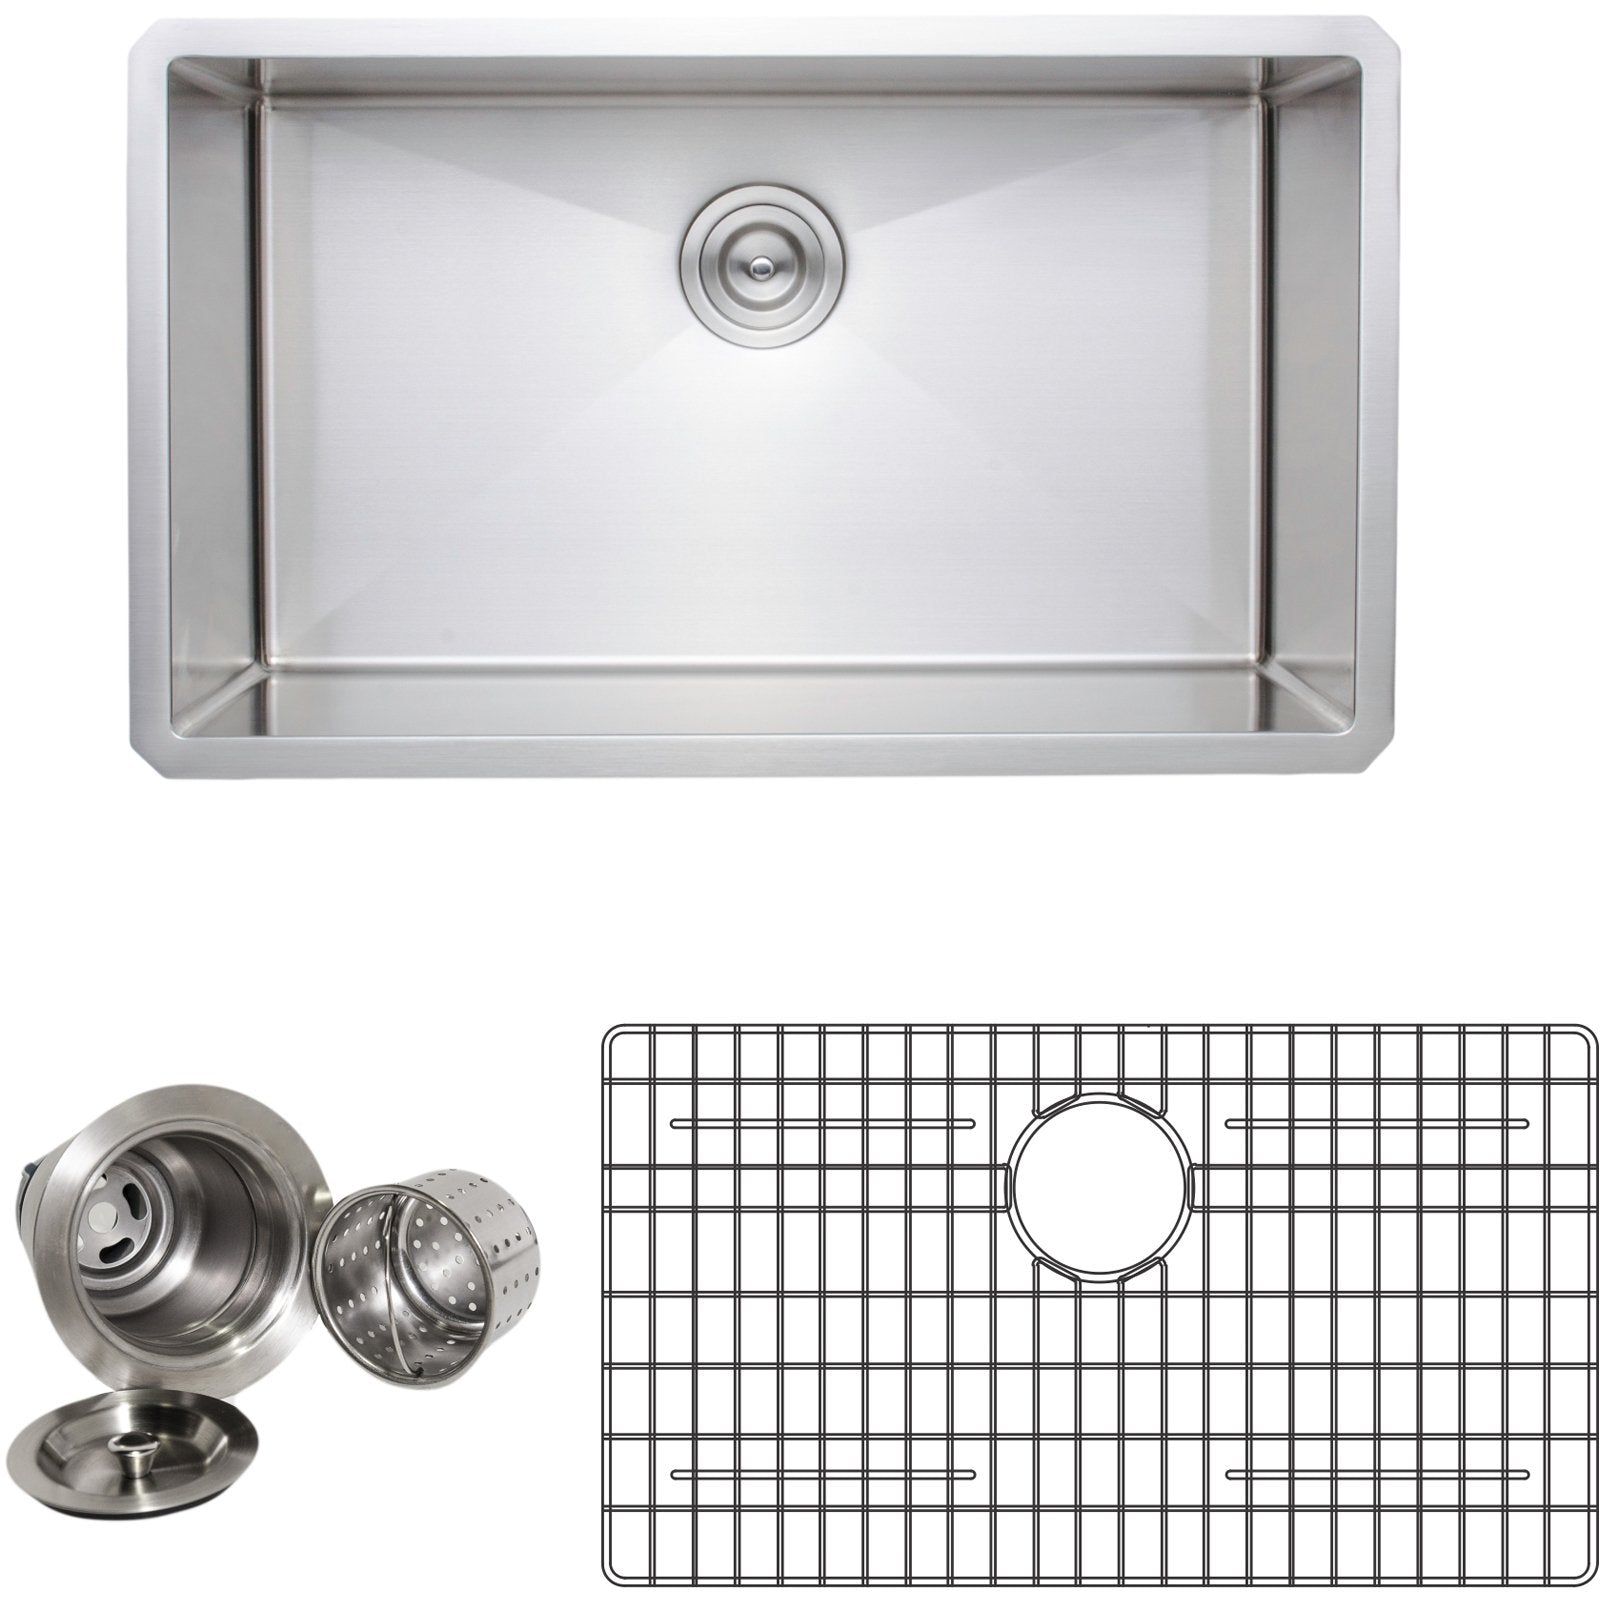 Wells Sinkware Handcrafted 30-Inch 16-Gauge Undermount Single Bowl Stainless Steel Kitchen Sink with Grid Rack and Basket Strainer-DirectSinks